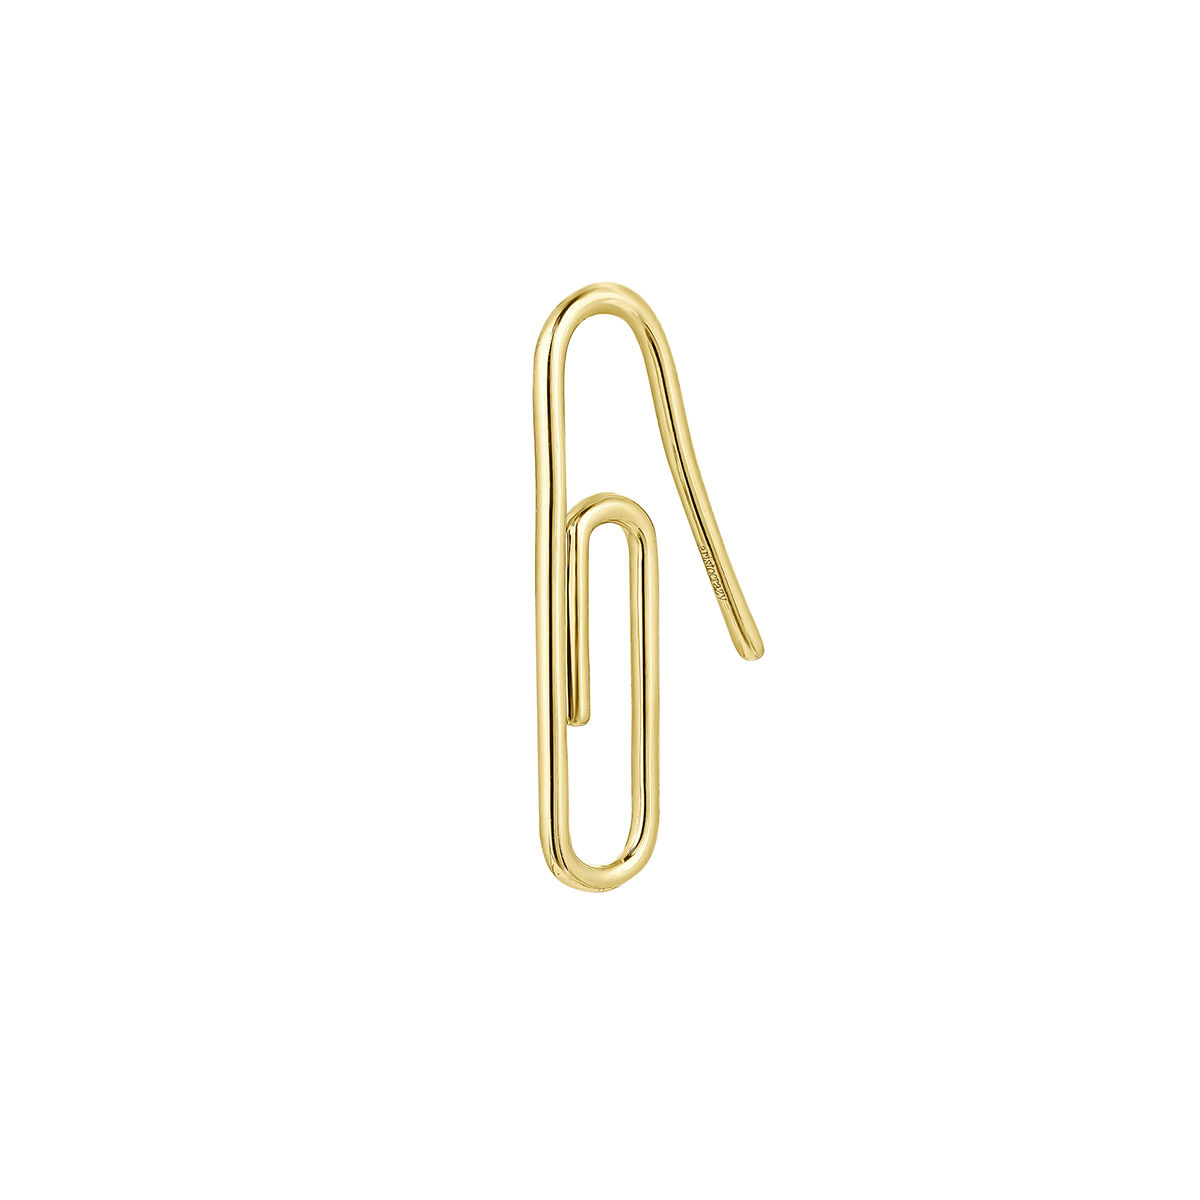 Gold paperclip earring, J05020-02-H, hi-res